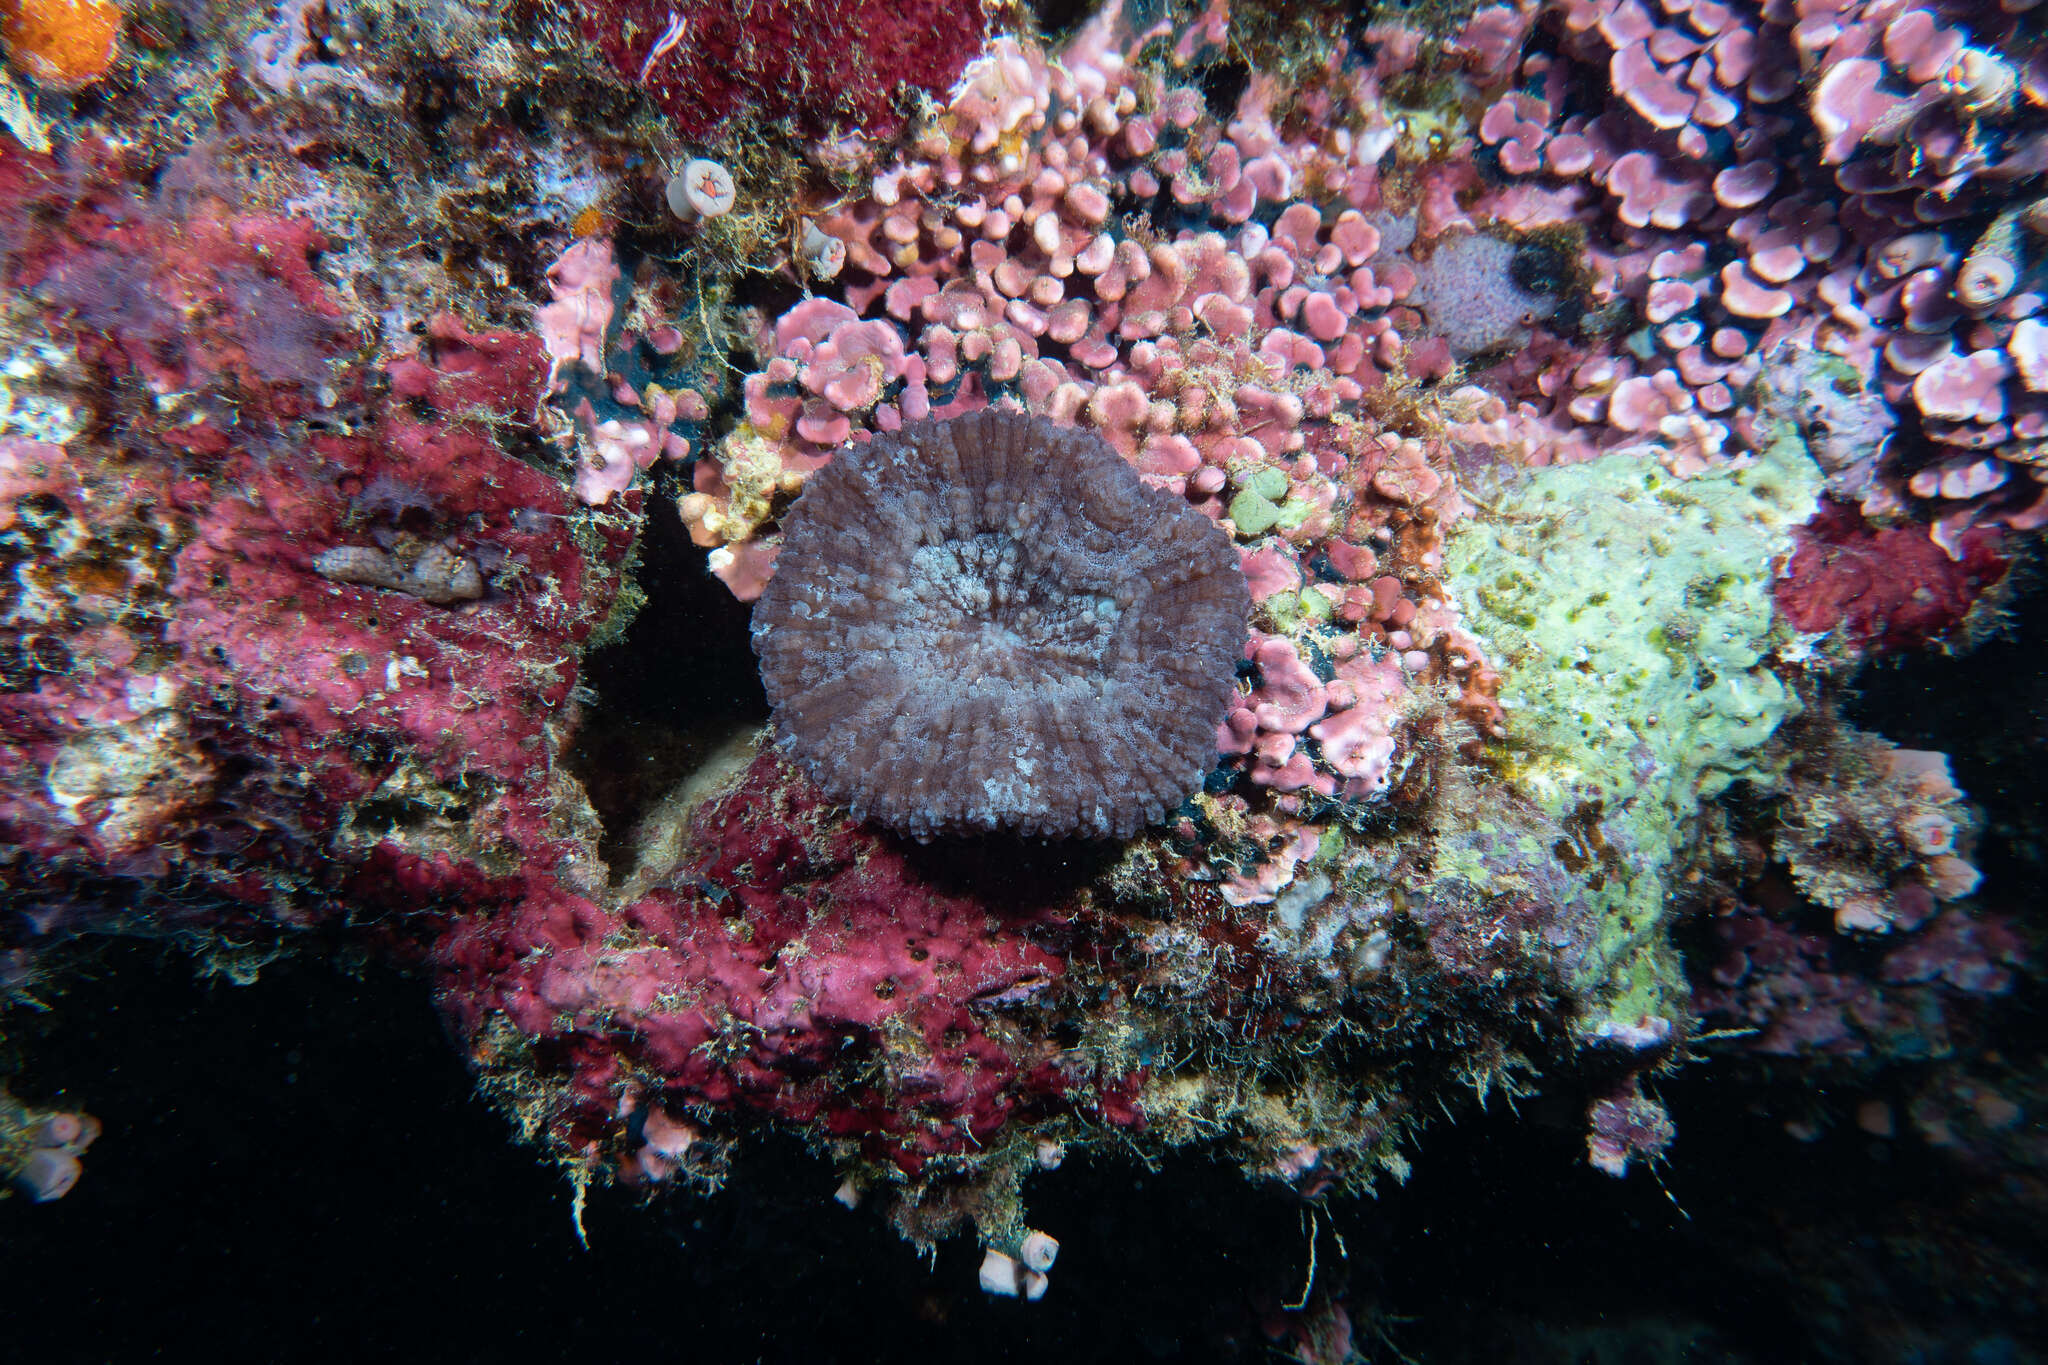 Image of Doughnut Coral